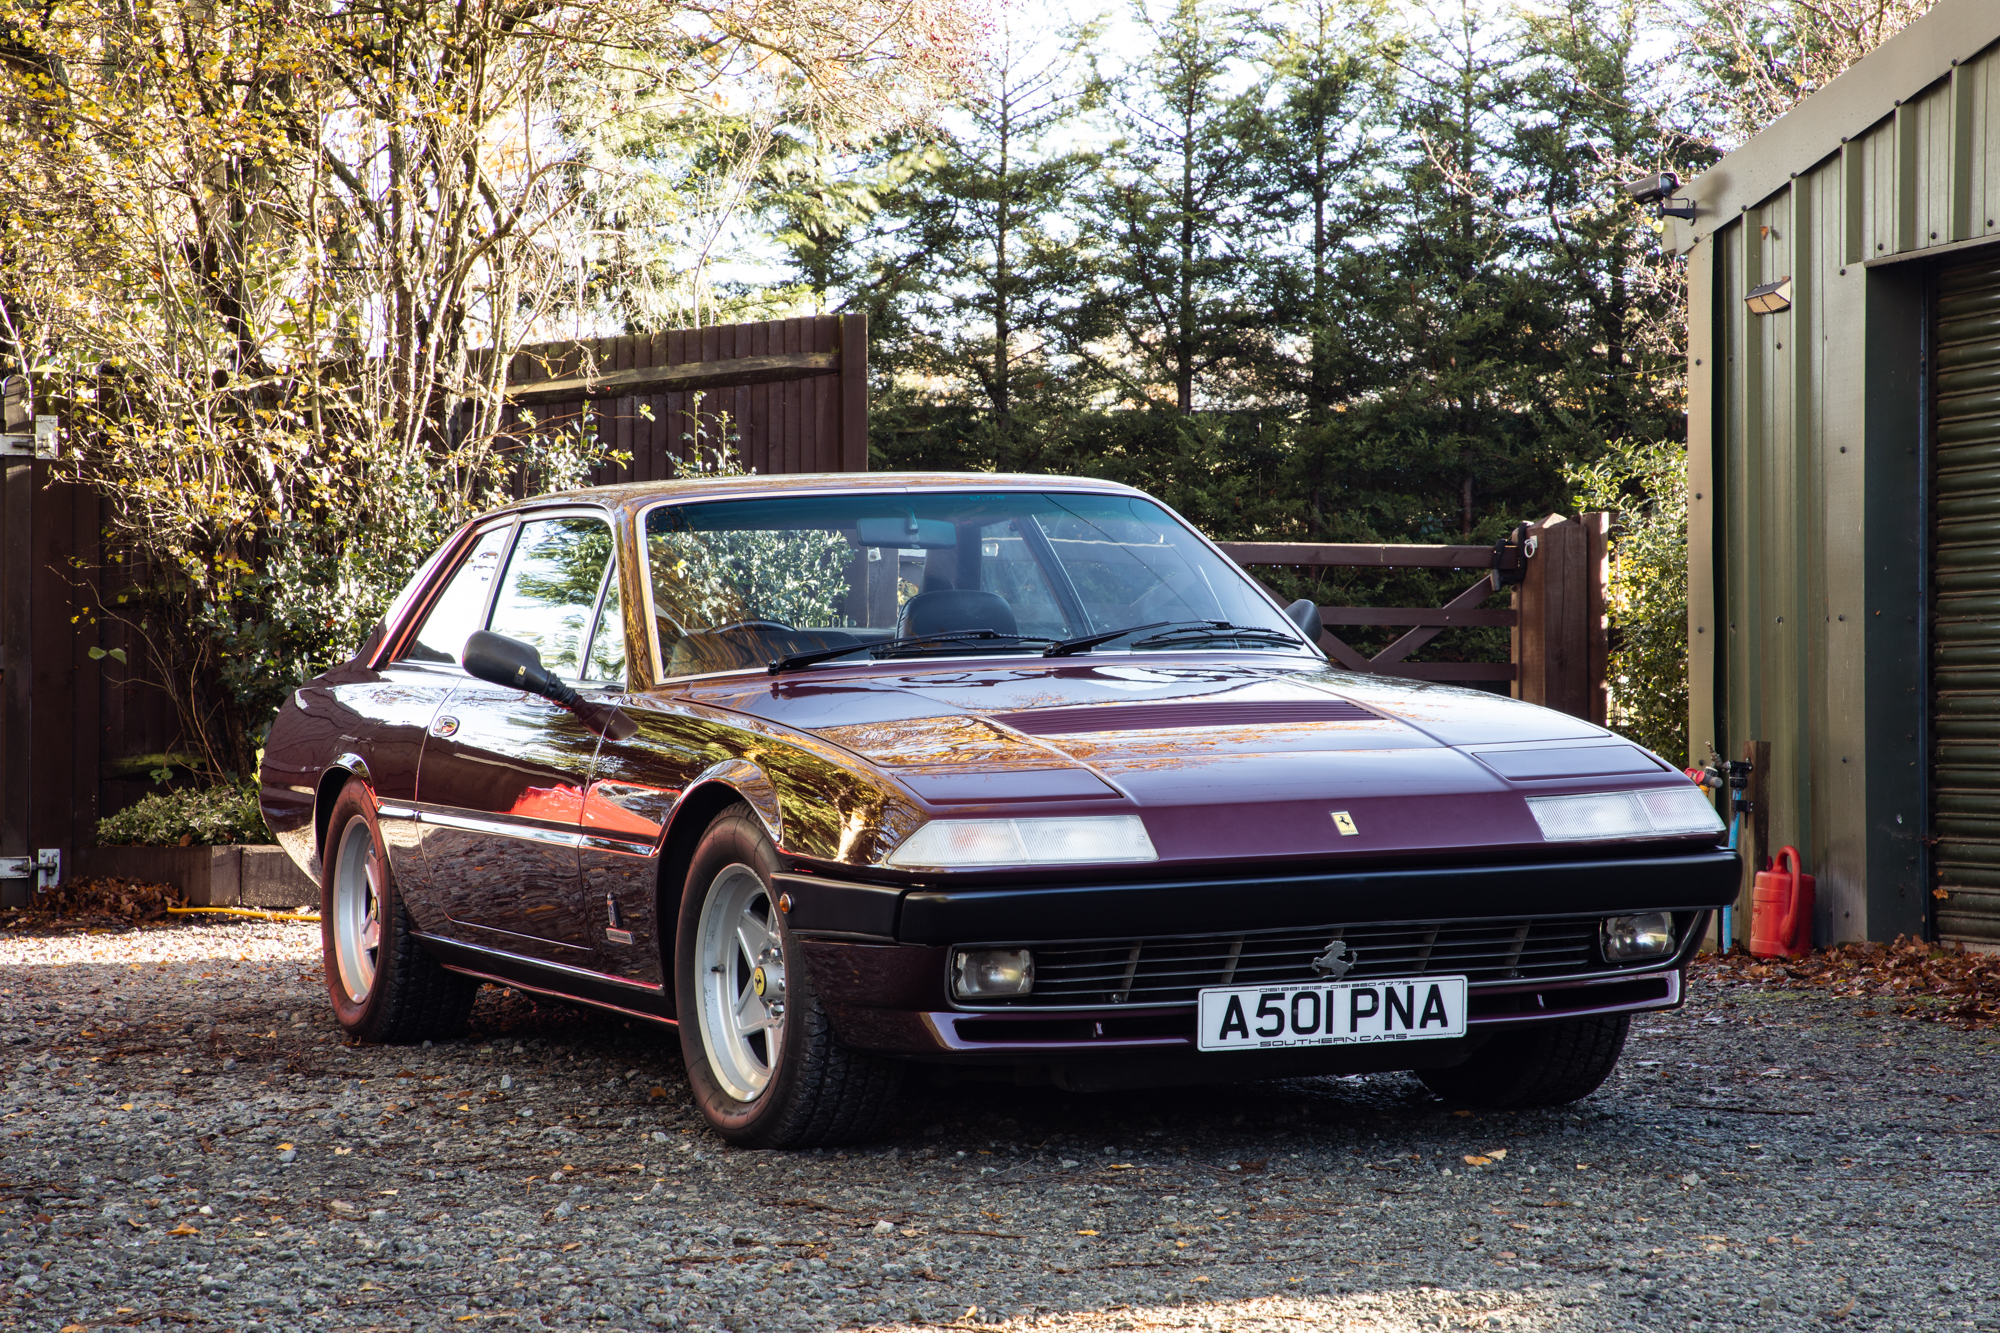 1984 FERRARI 400I AUTOMATIC for sale by auction in Welwyn, United